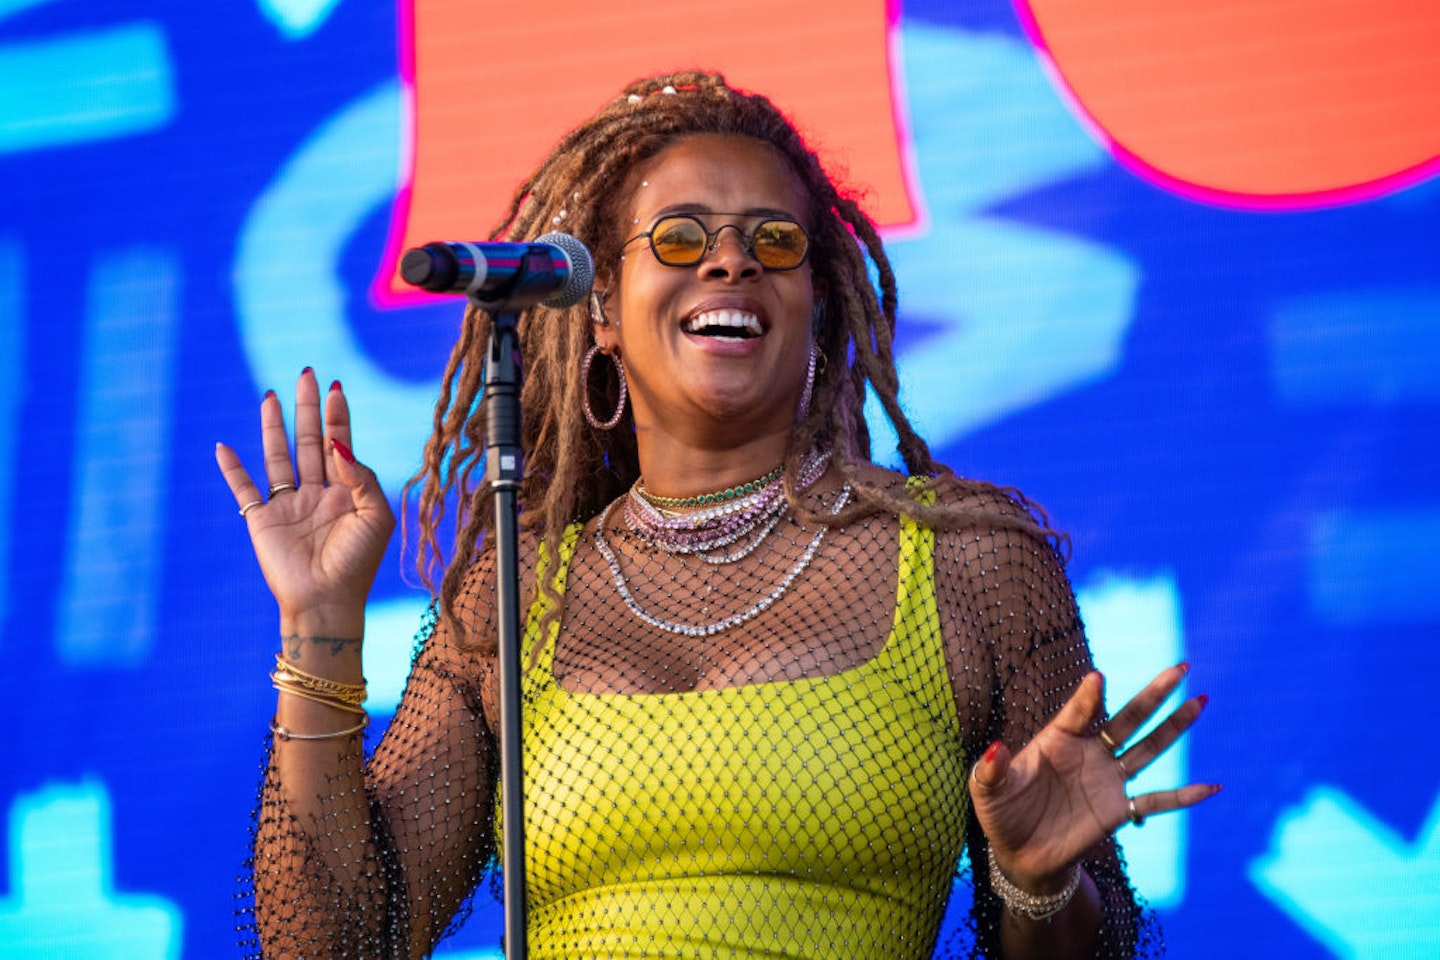 Kelis performing at Mighty Hoopla, dressed in green dress and sunglasses